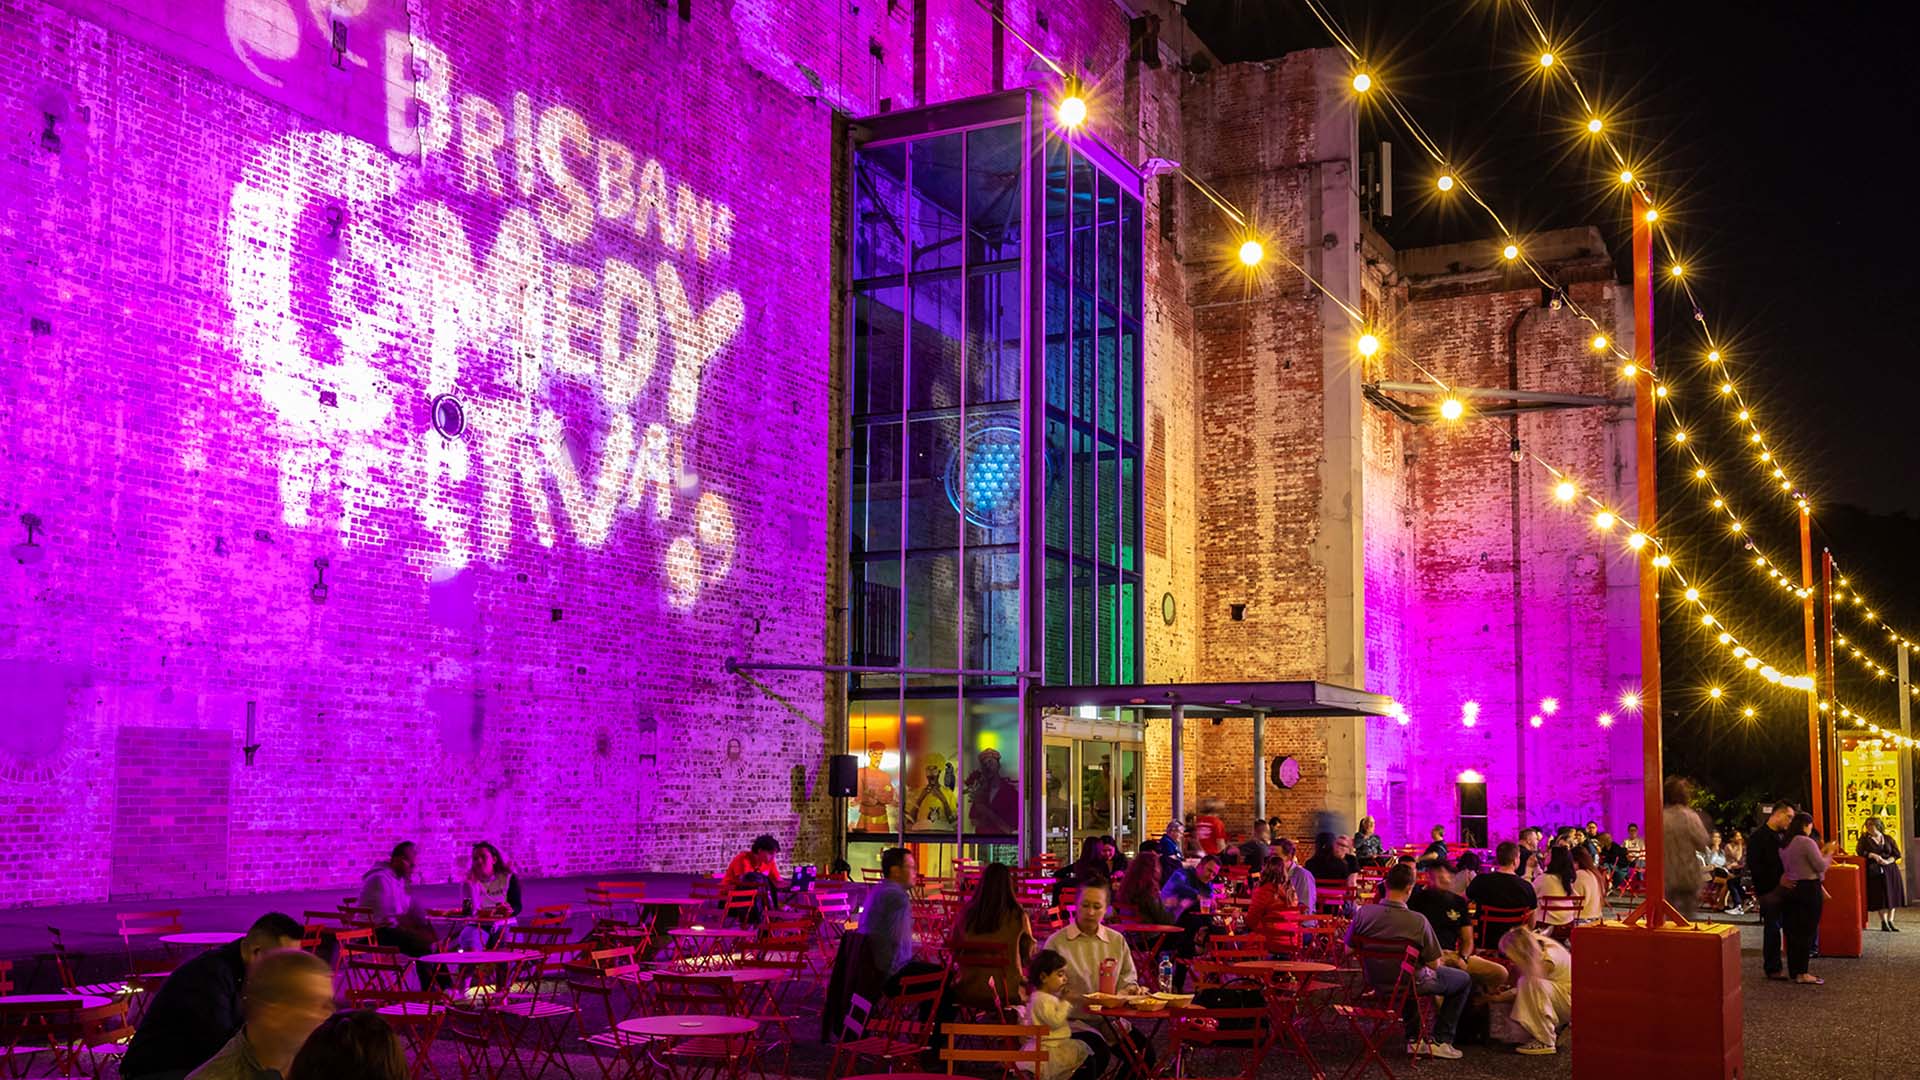 Revel Brewing Co Has Launched a Pop-Up Bar Outside Powerhouse Just for Brisbane Comedy Festival